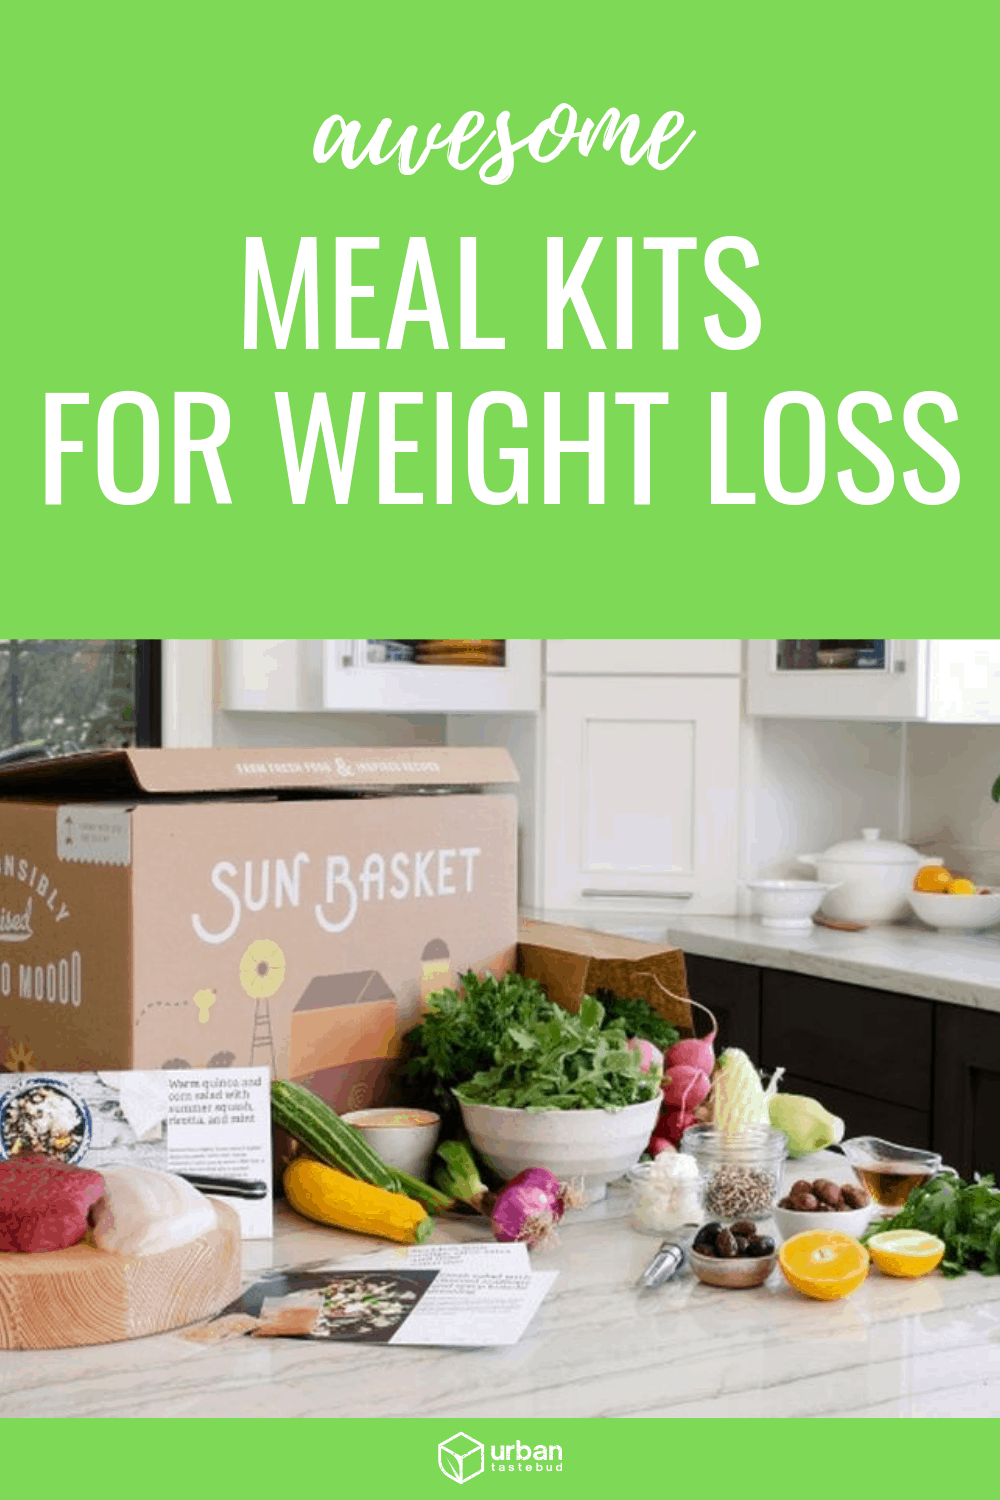 Best Meal Kits for Weight Loss